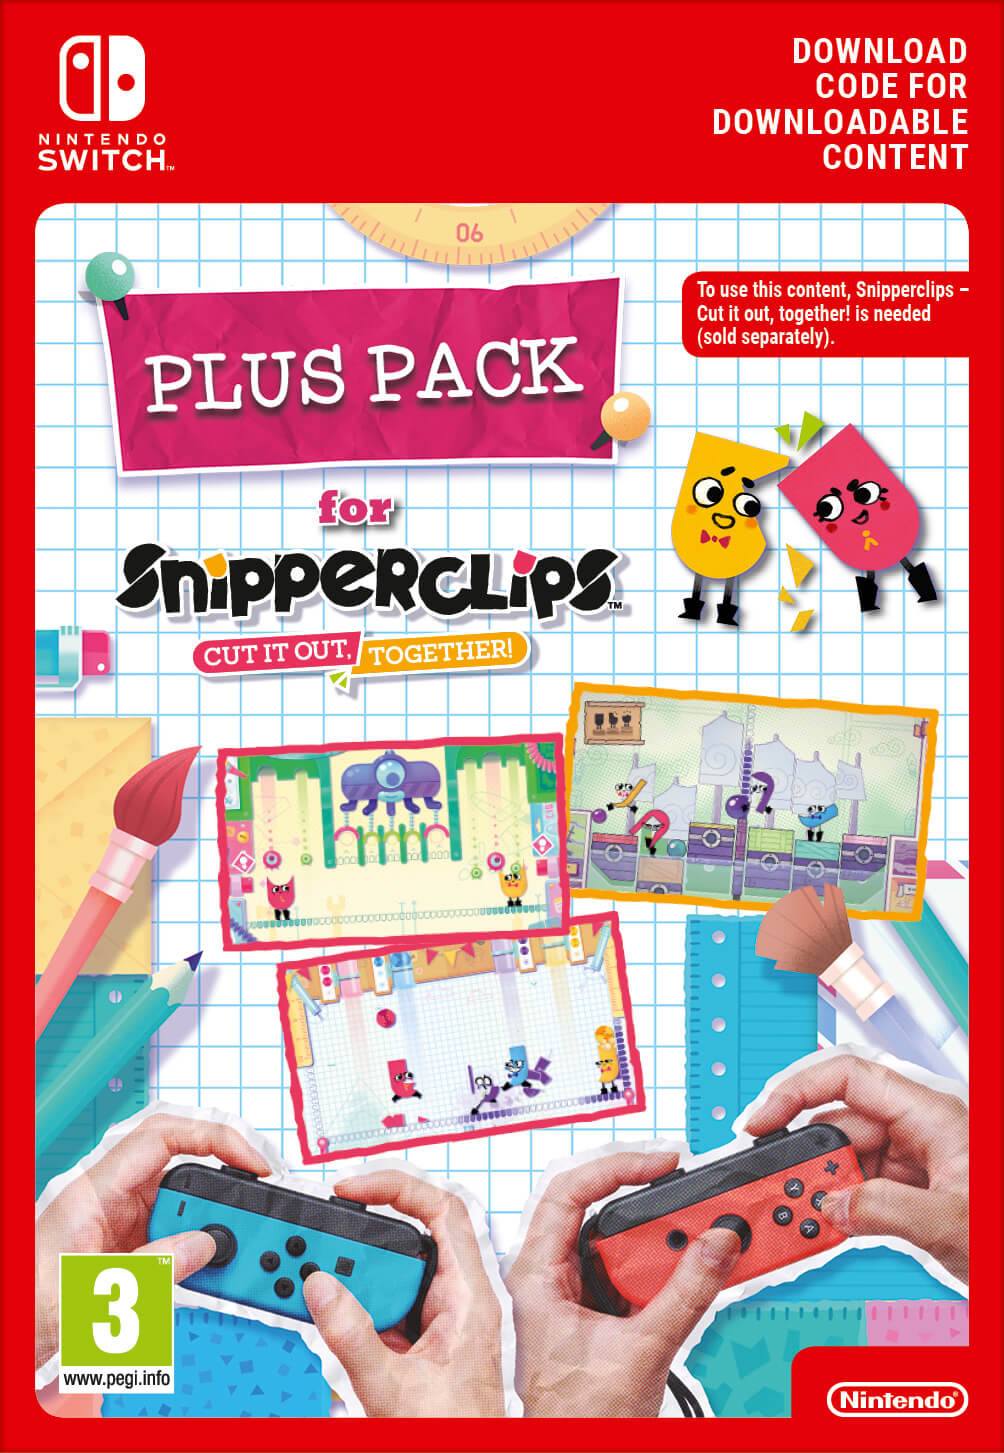 Snipperclips: Cut it out together PlusPack von Nintendo